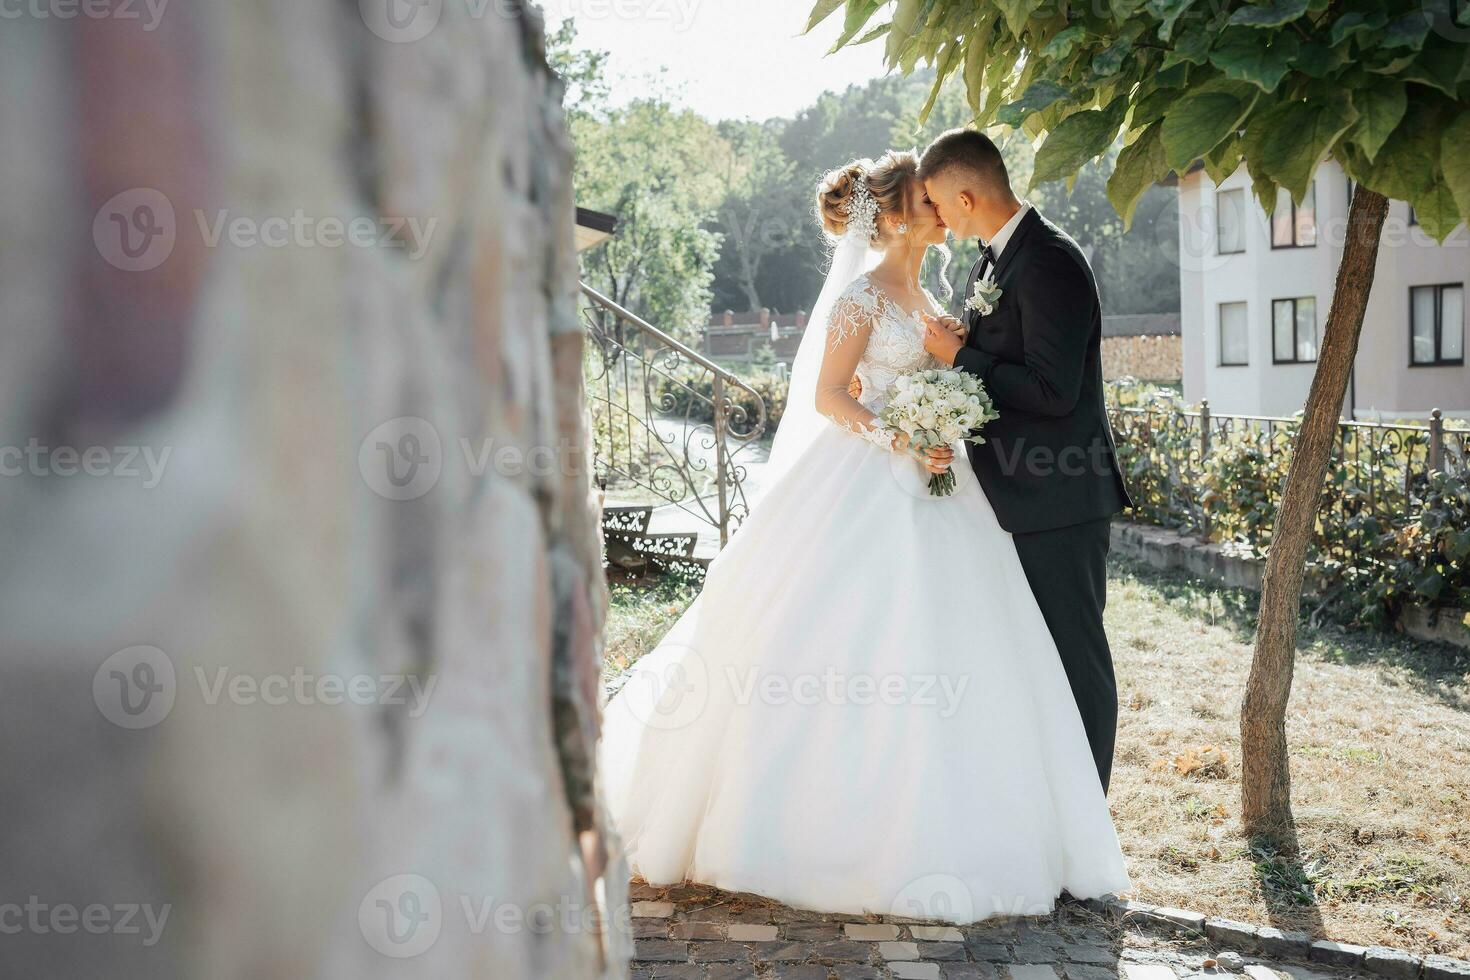 Wedding portrait. The groom in a black suit and the blonde bride stand by a stone wall under a tree, the groom kisses the bride's hand. Photo session in nature. Beautiful hair and makeup